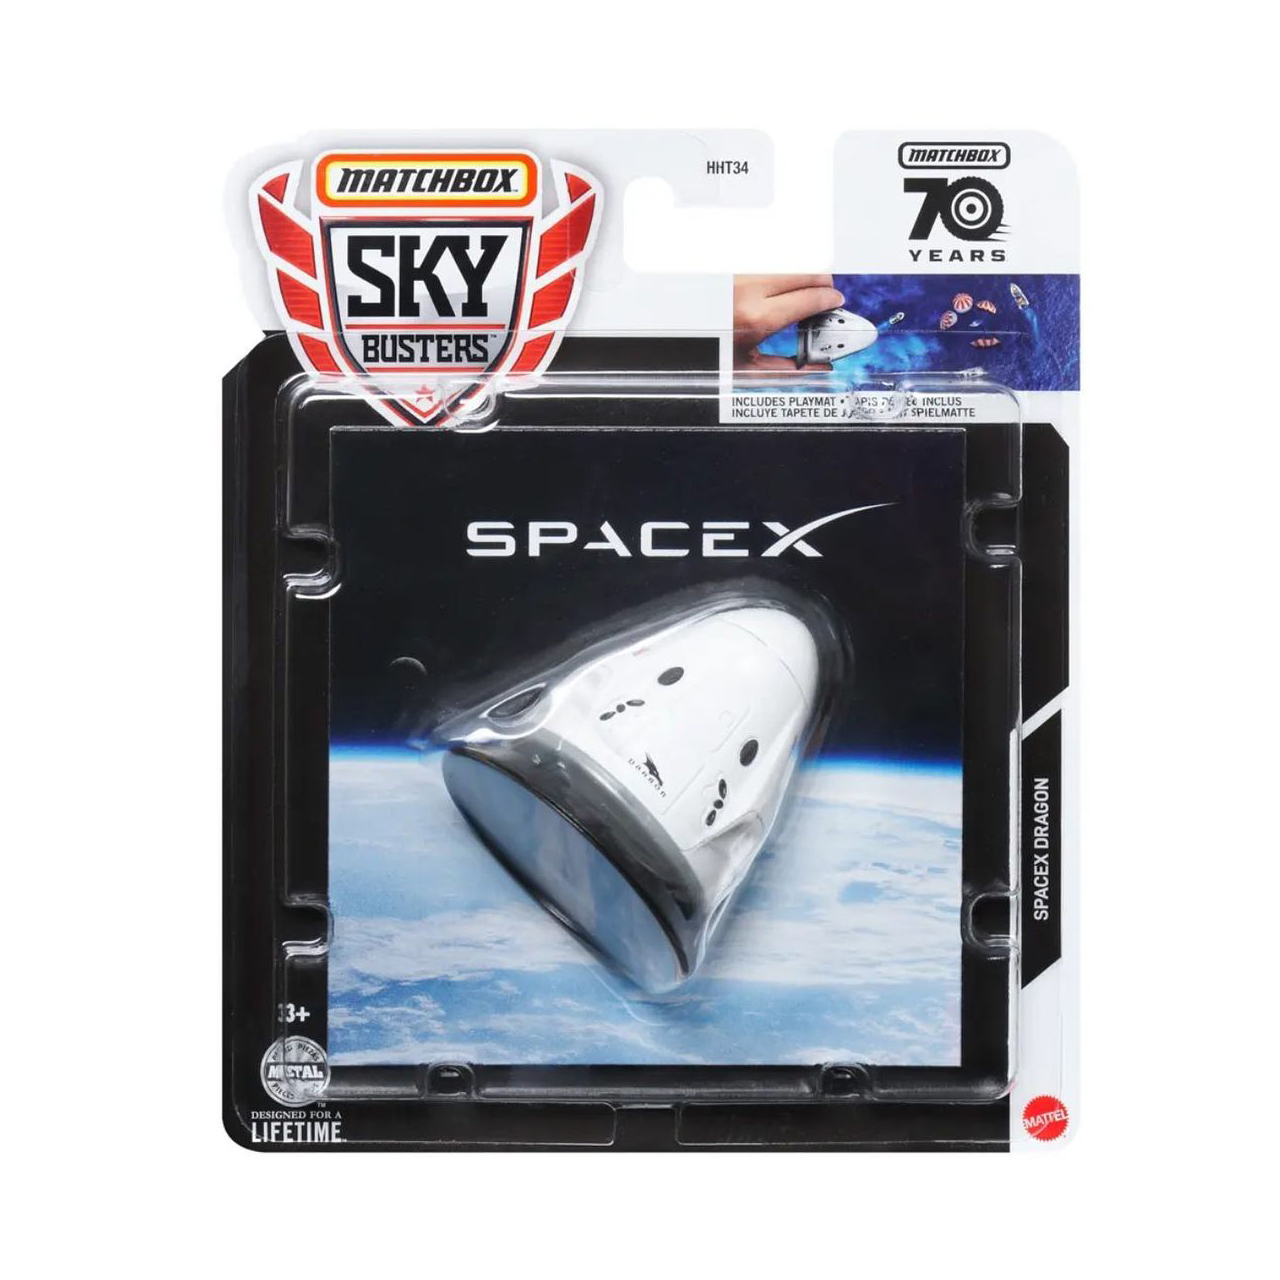 Mattel's Matchbox Sky Busters line now includes a die-cast model of the SpaceX Dragon capsule.